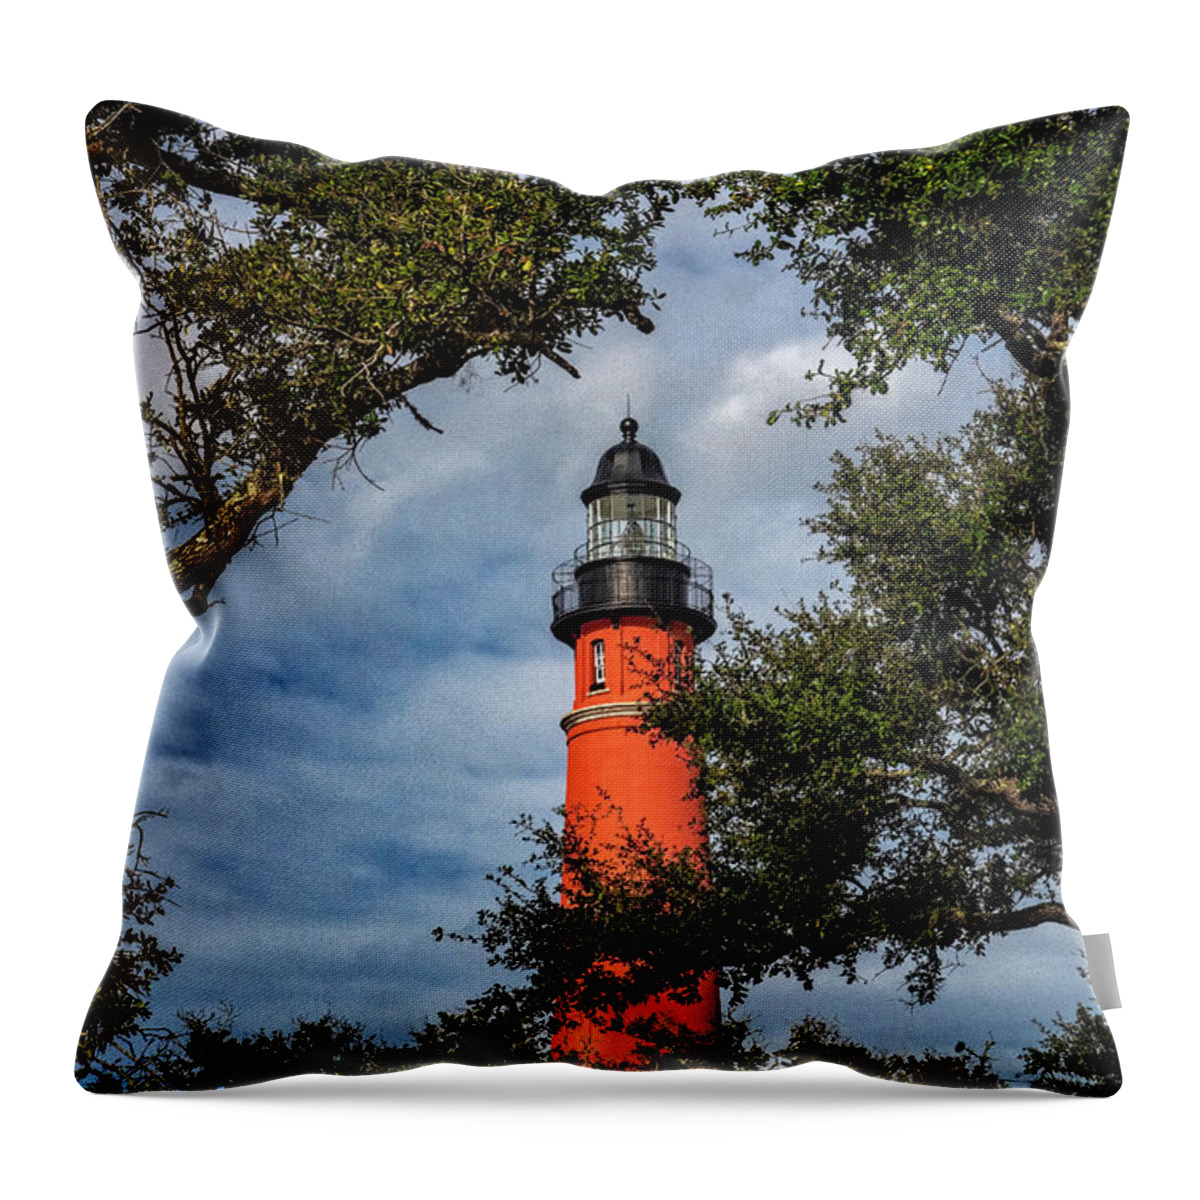 Barberville Roadside Yard Art And Produce Throw Pillow featuring the photograph Ponce Inlet Lighthouse by Tom Singleton